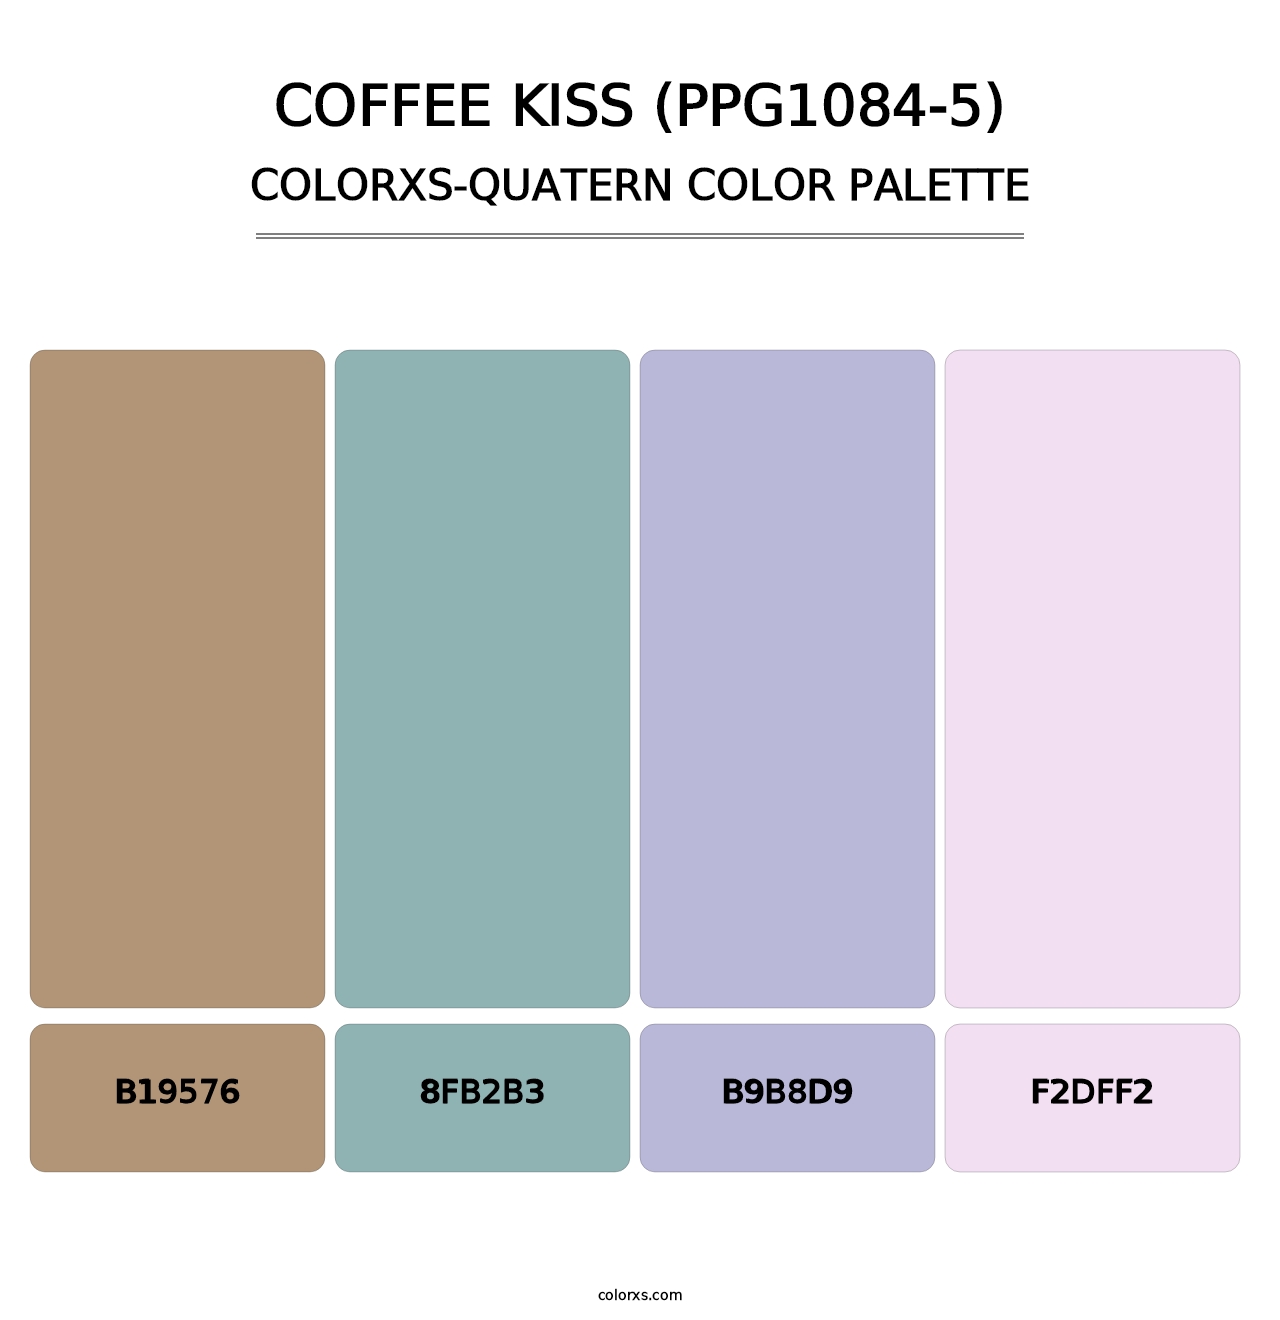 Coffee Kiss (PPG1084-5) - Colorxs Quatern Palette